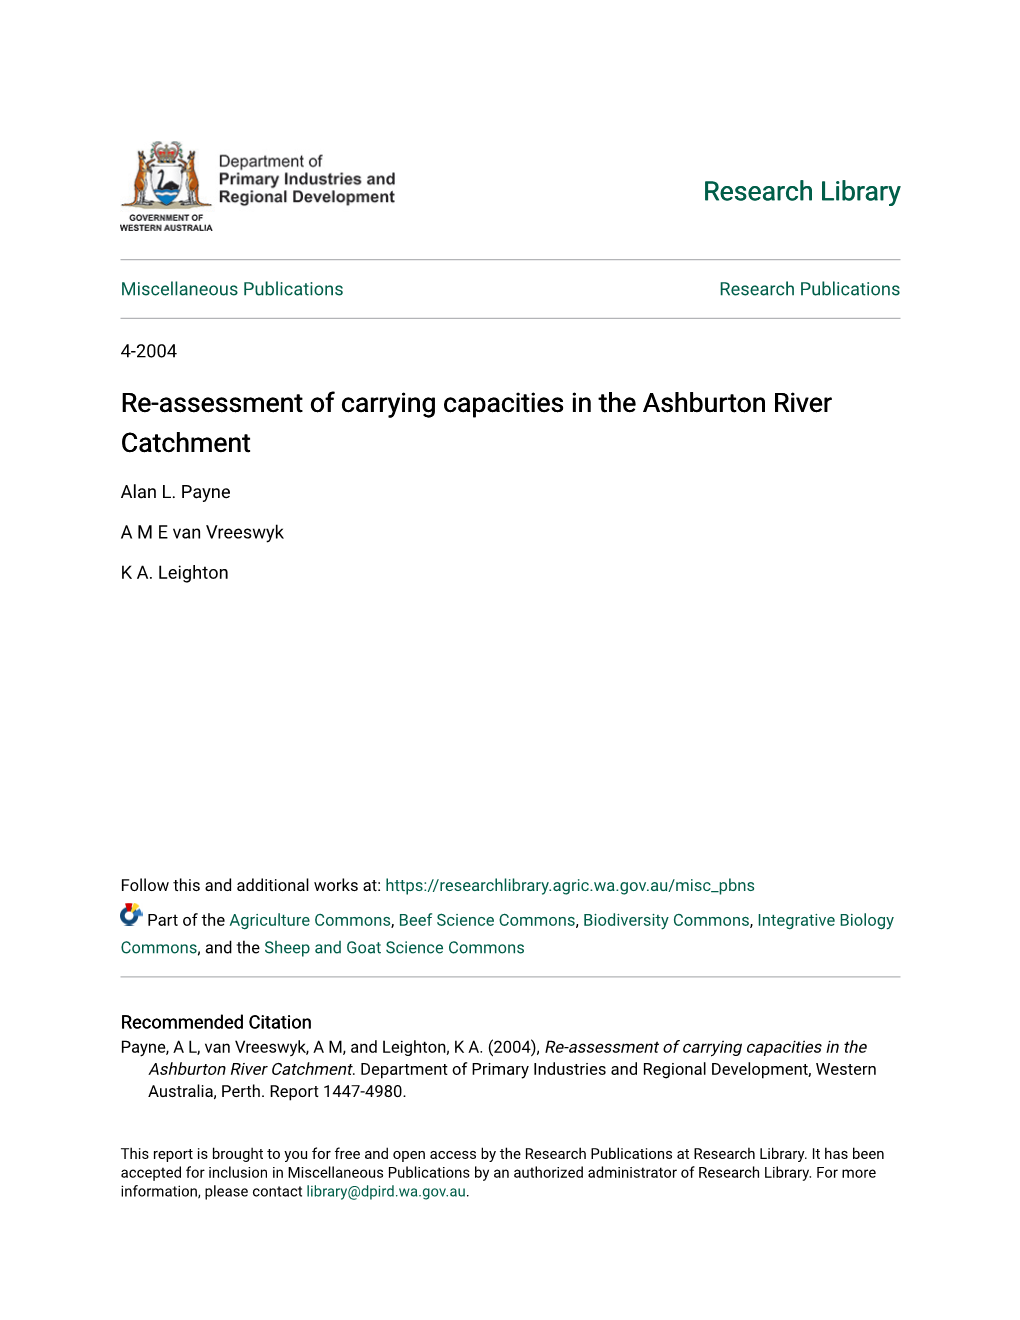 Re-Assessment of Carrying Capacities in the Ashburton River Catchment